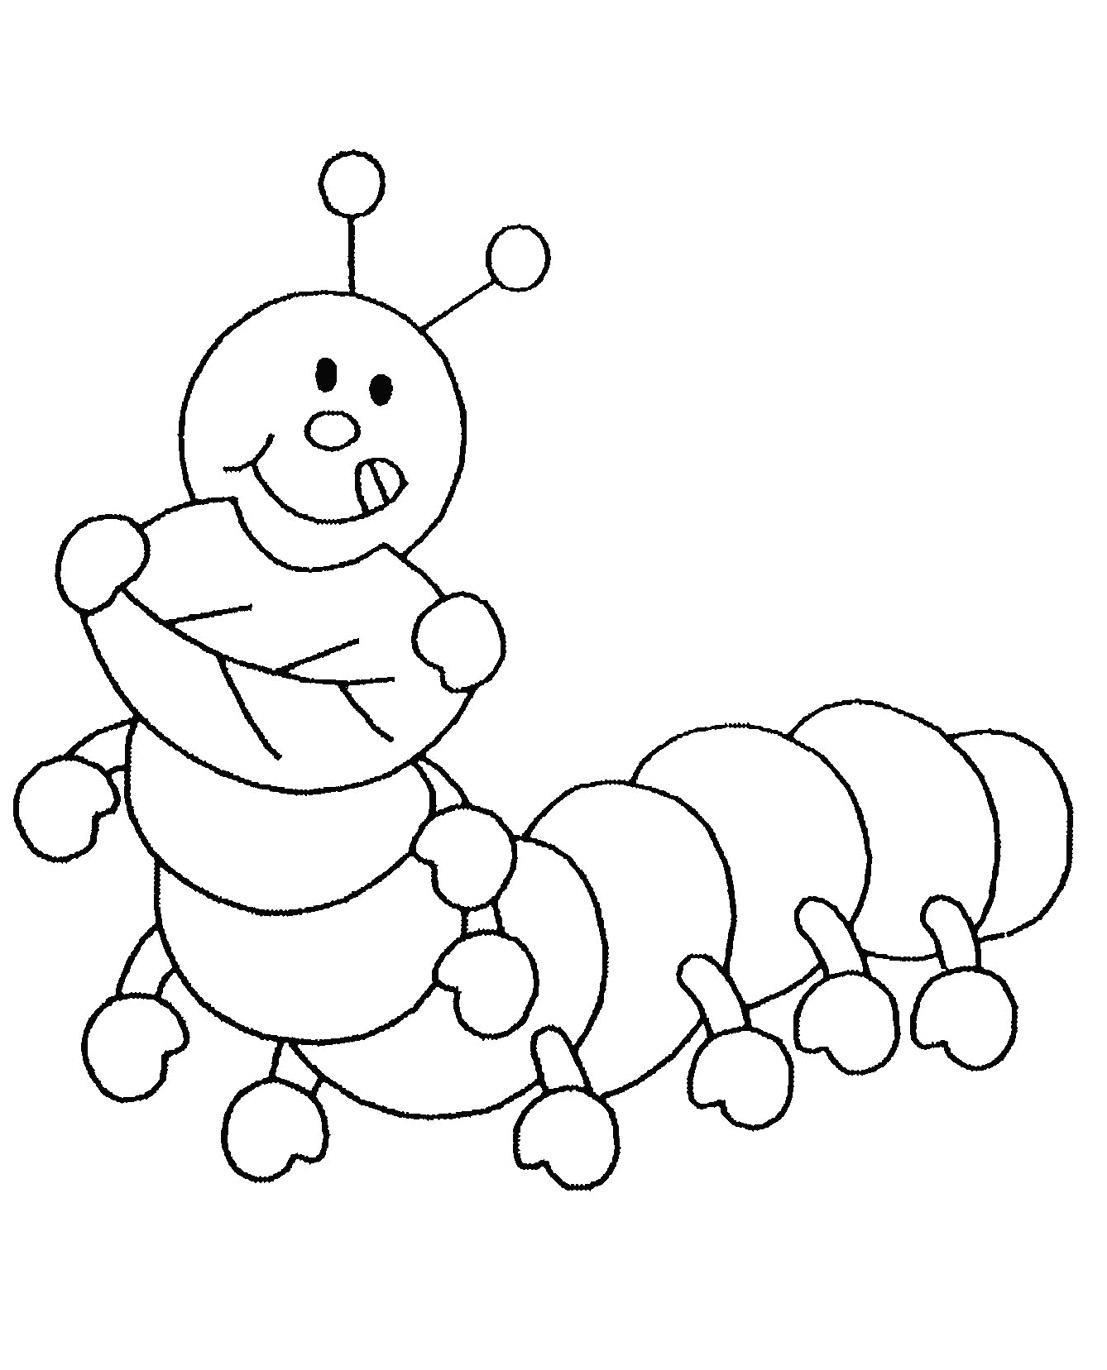 Insect Childrens Coloring Sheets 3